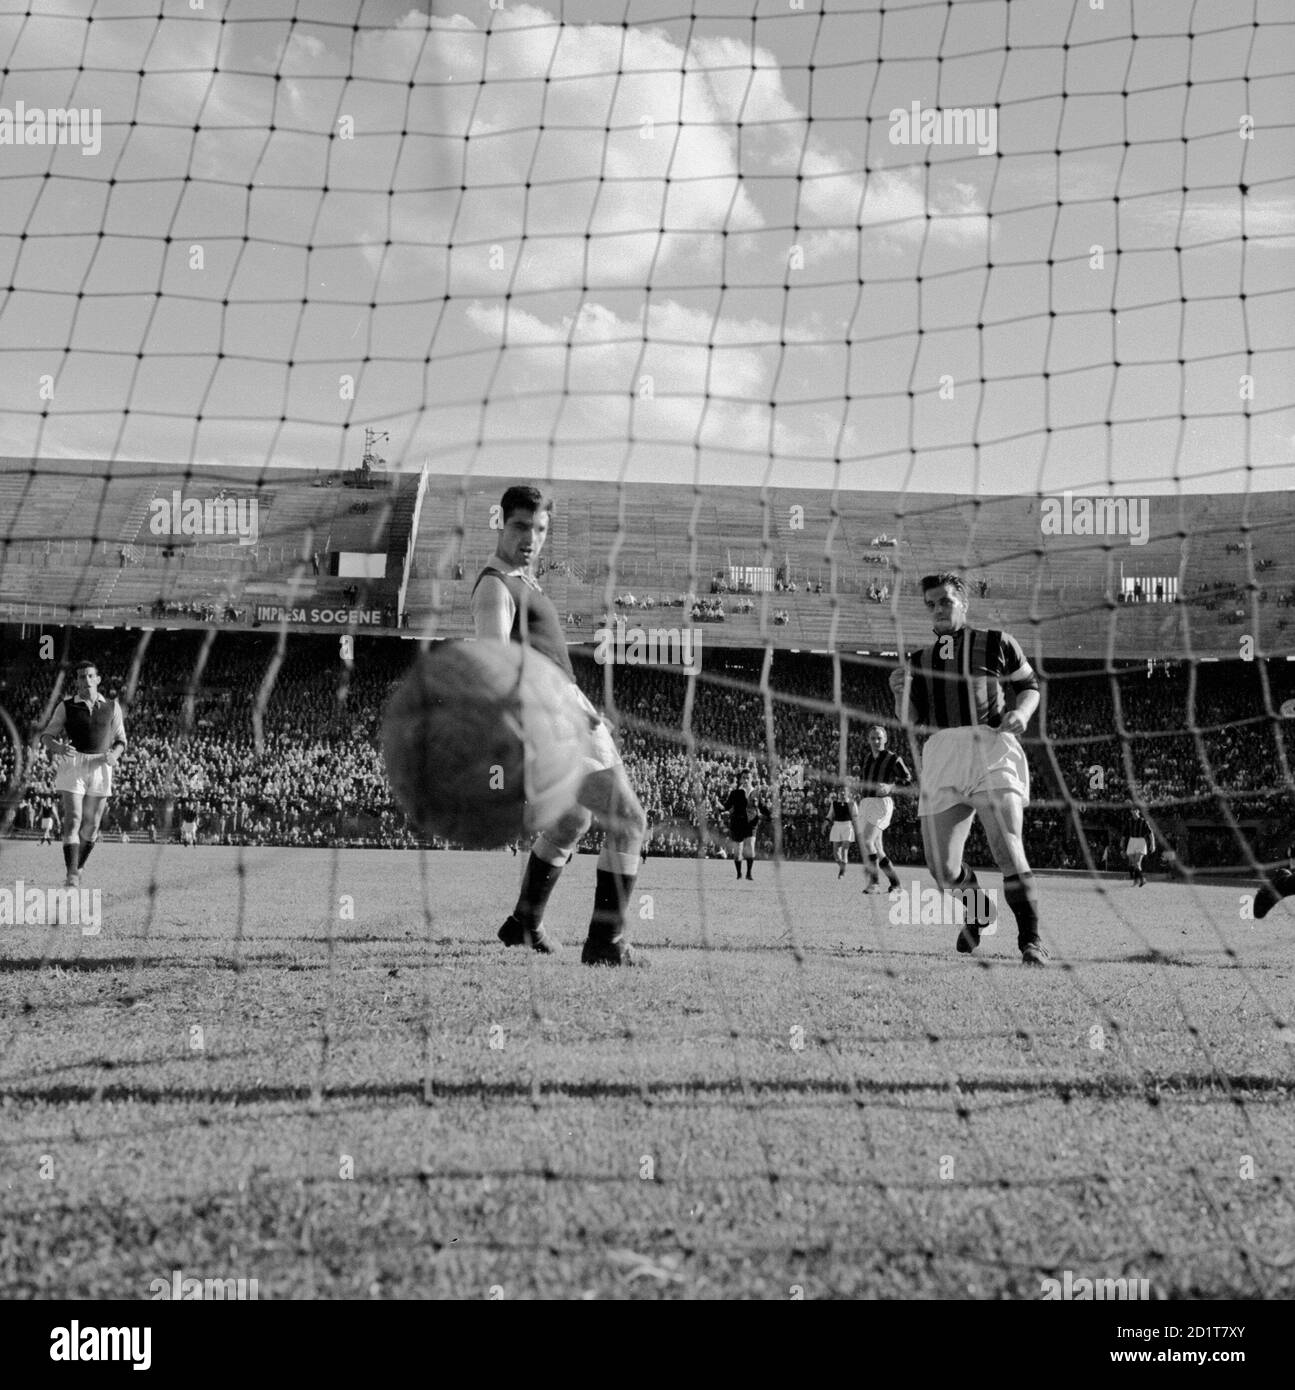 AC Milan wins the 5th Scudetto. One of the four goals scored by Gunnar  Nordahl (Milan) during the Milan-Spal match (6-0) of the 1954/1955 Serie A  football championship (matchday 33), Milan (San